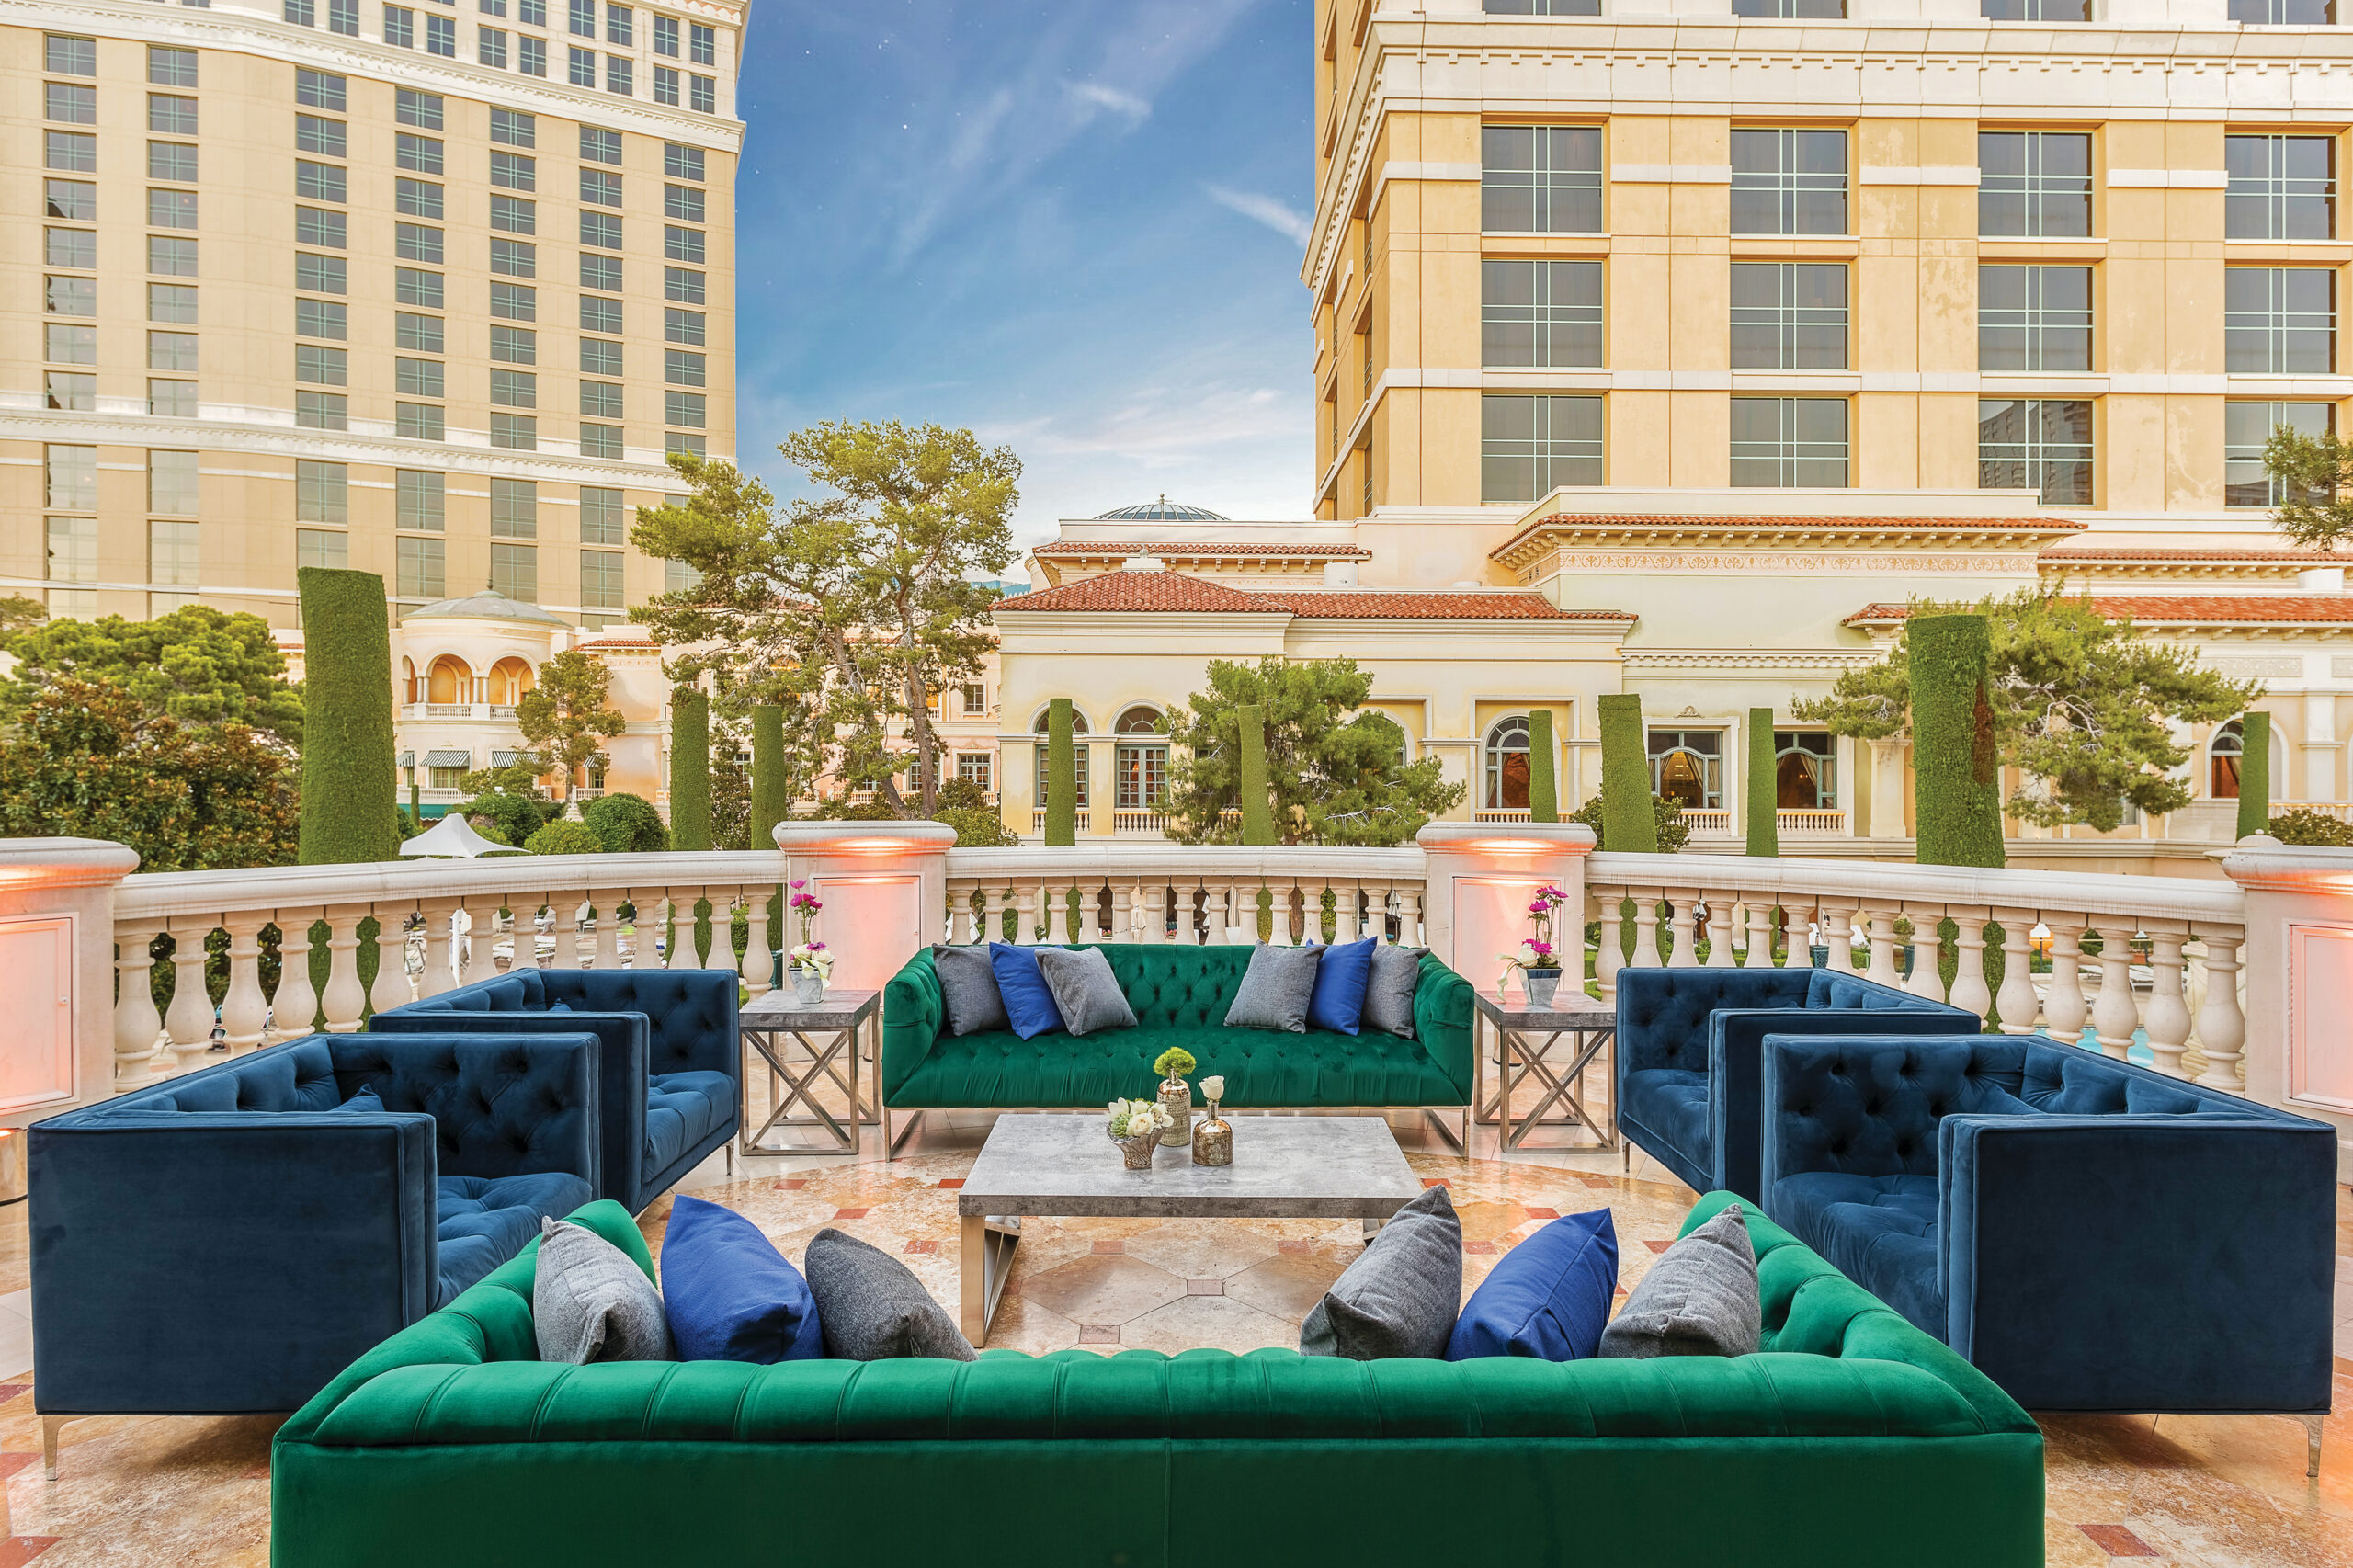 An outdoor patio at Mandalay Bay Beach. Blue and green couches are arranged around a small table.